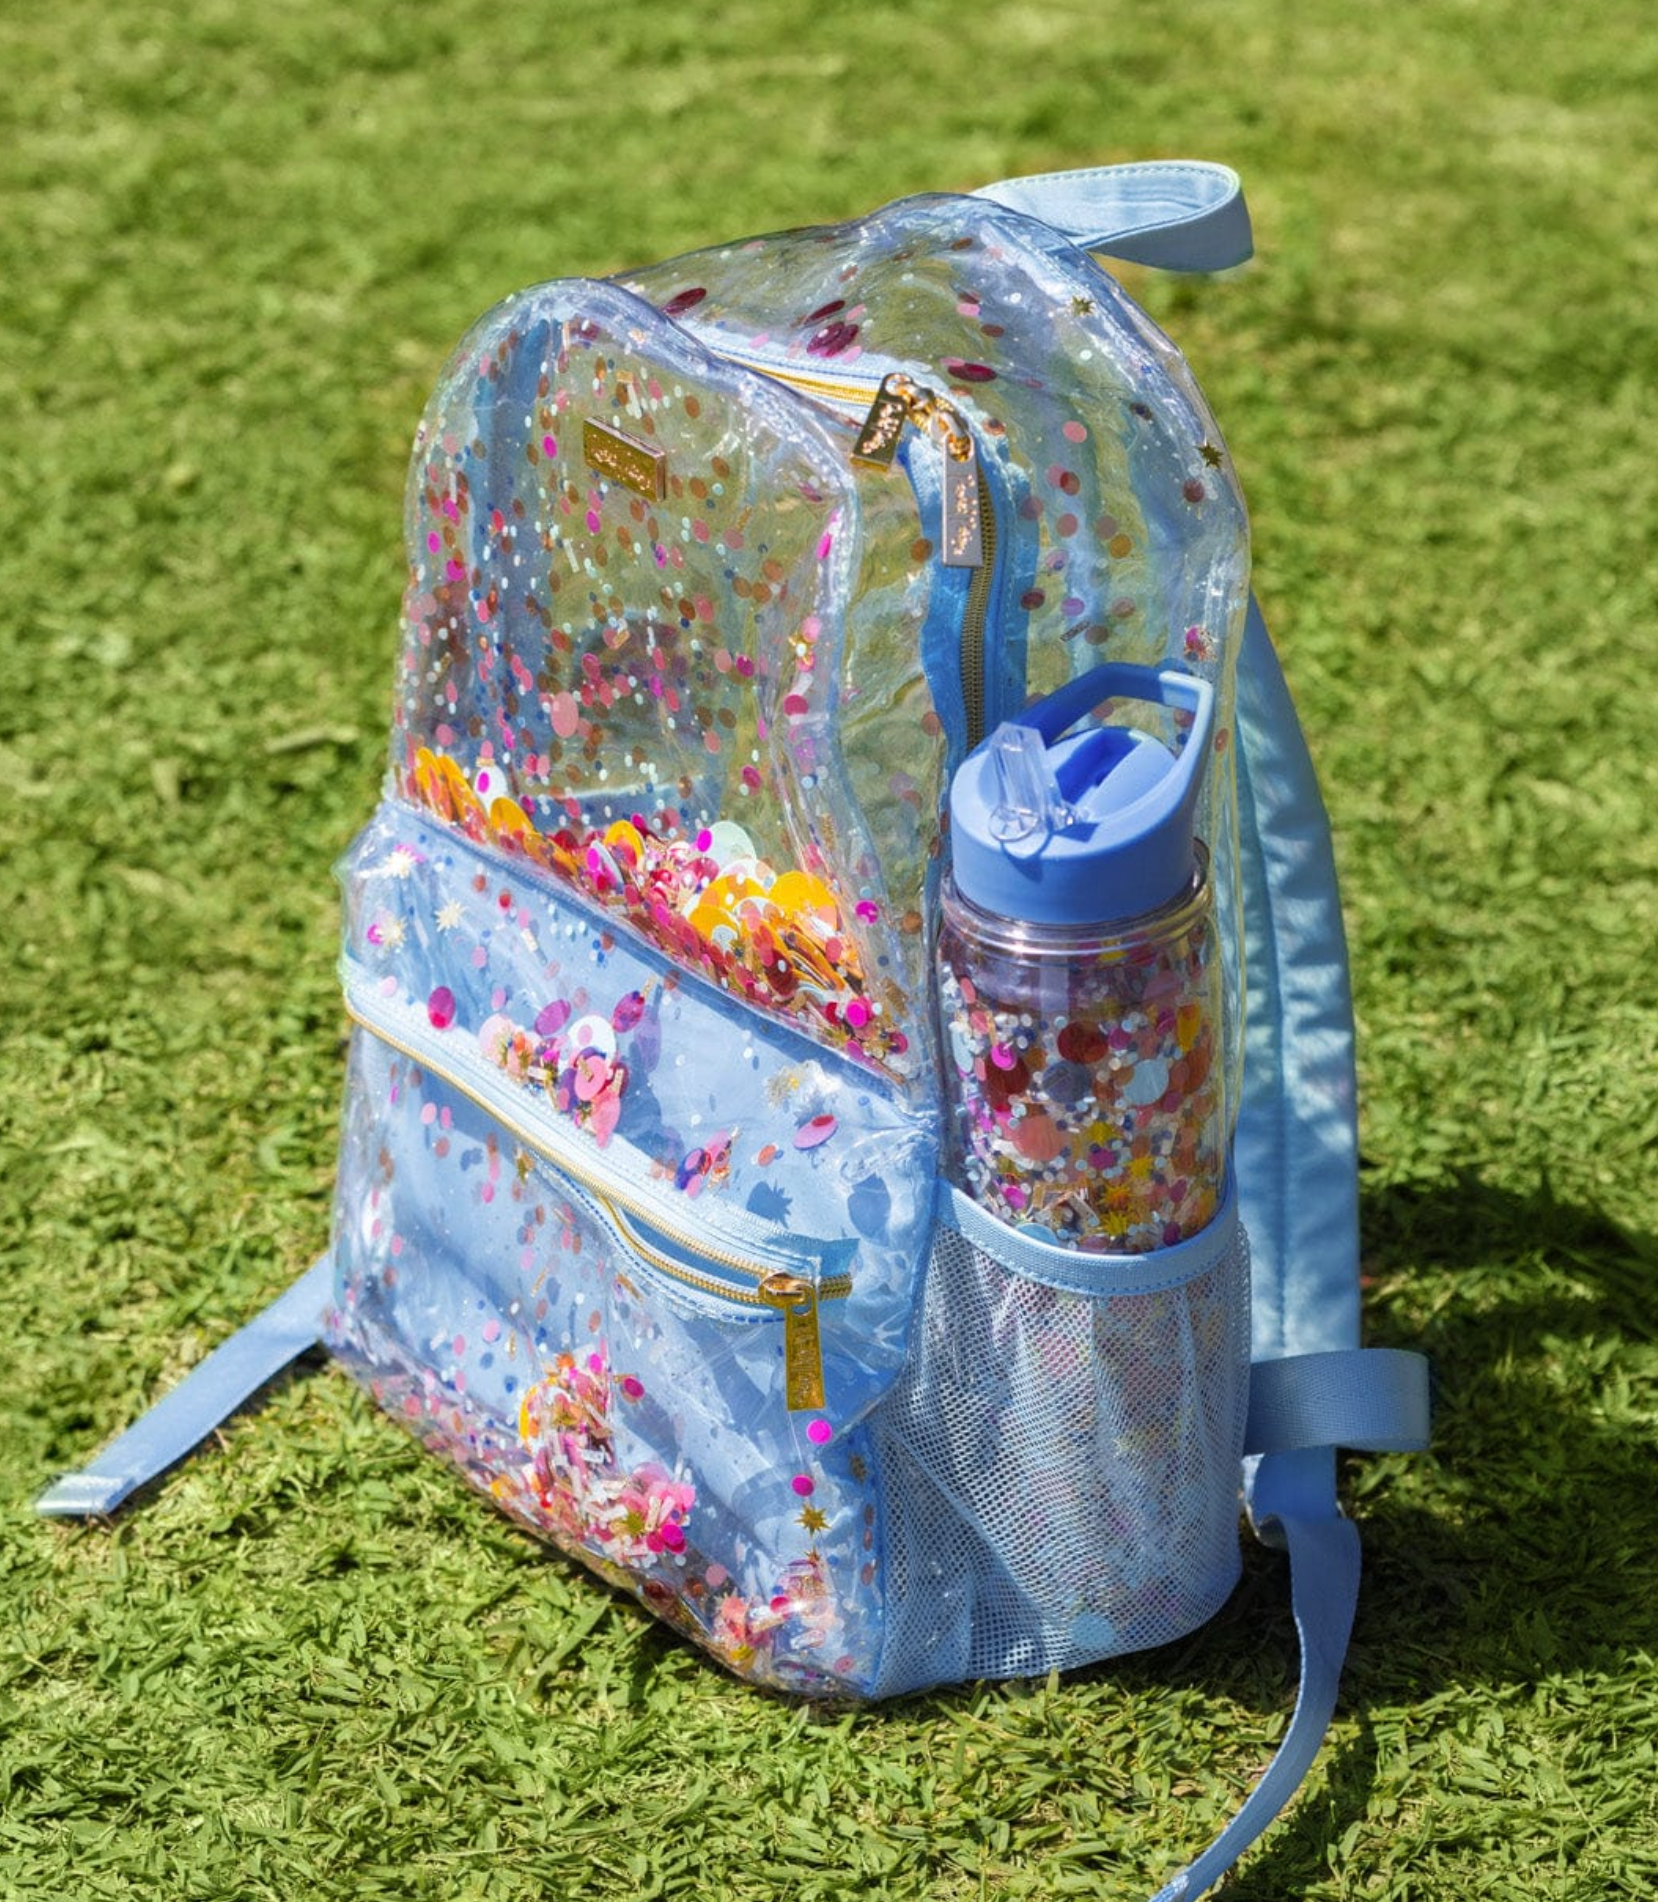 Celebrate Every Day Backpack